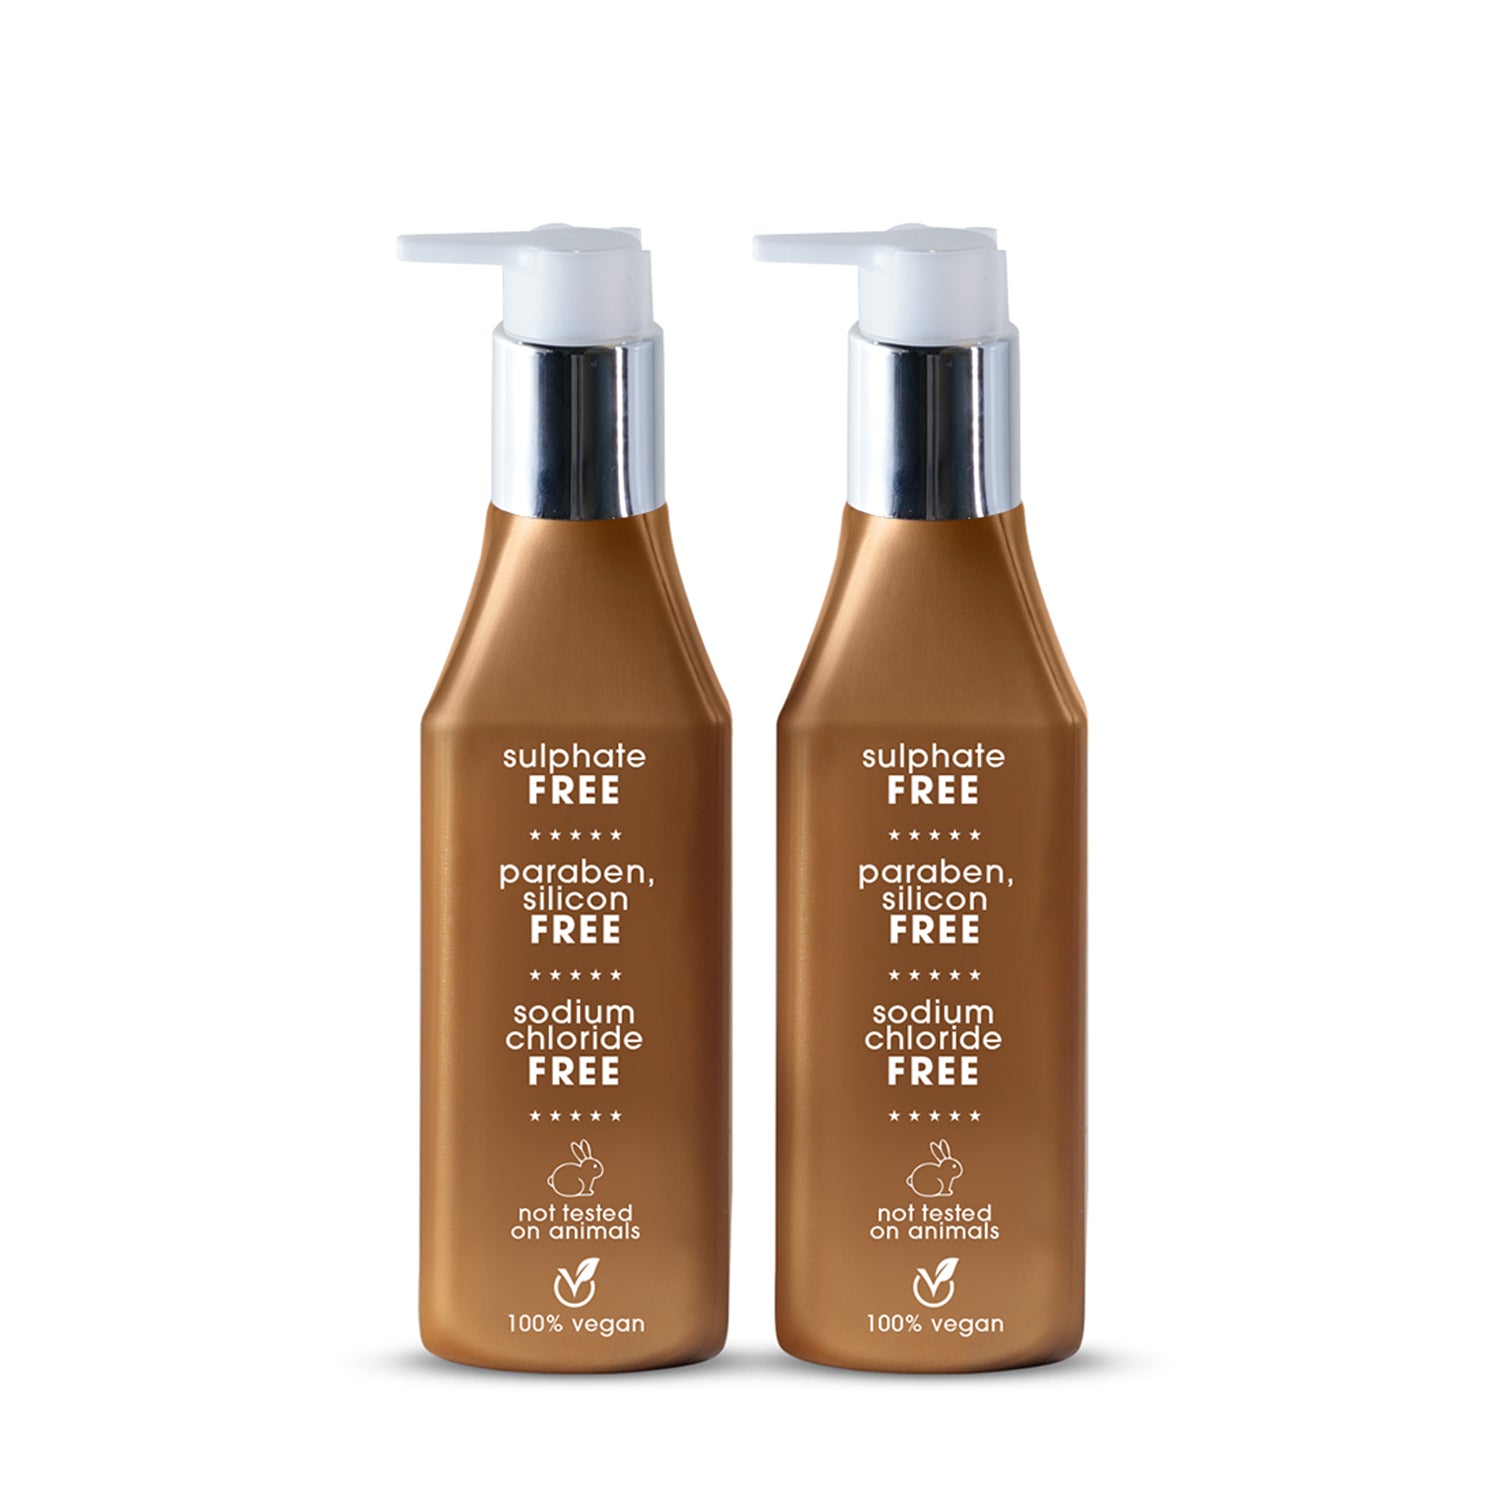 KT Professional Coffee Bean Shampoo &amp; Conditioner 250ml Each ( Pack Of 2 )